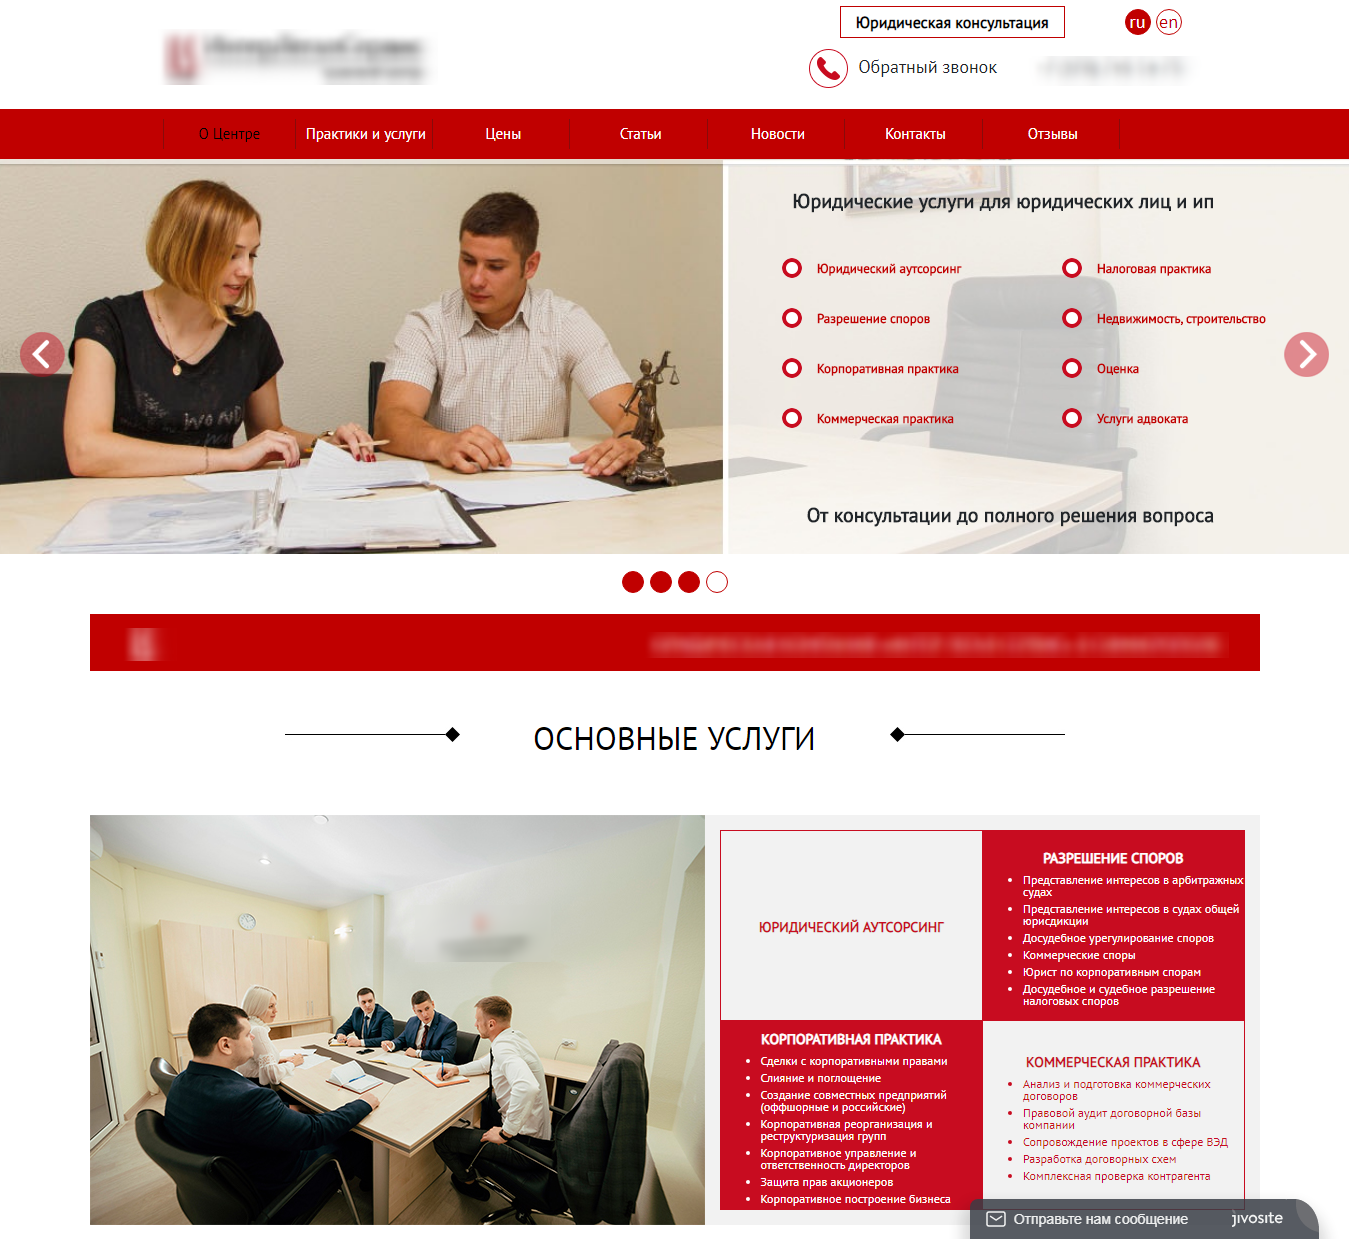 An example of a site where the main focus is on corporate practice